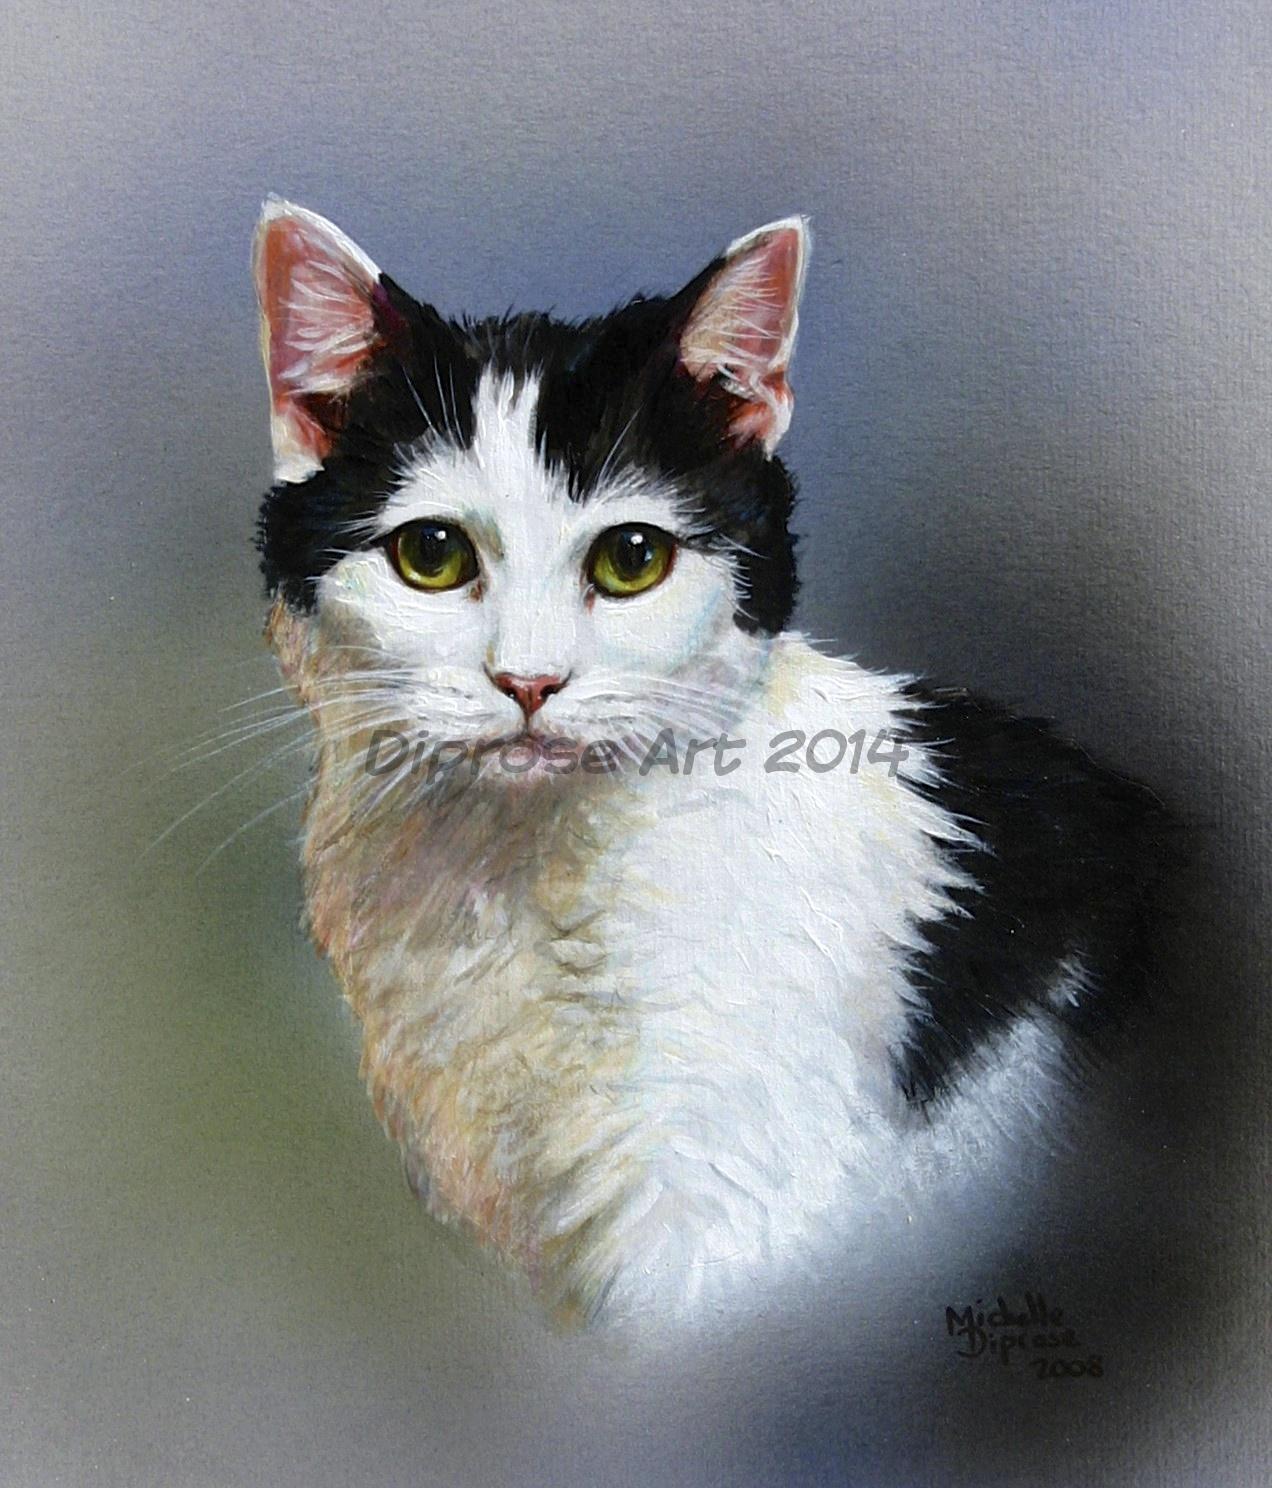 Acrylics on board - approx A4 - pet cat portrait - this dear little cat is one of my favourite cat portraits - she has such a sweet face and the light and shade give the portrait depth.